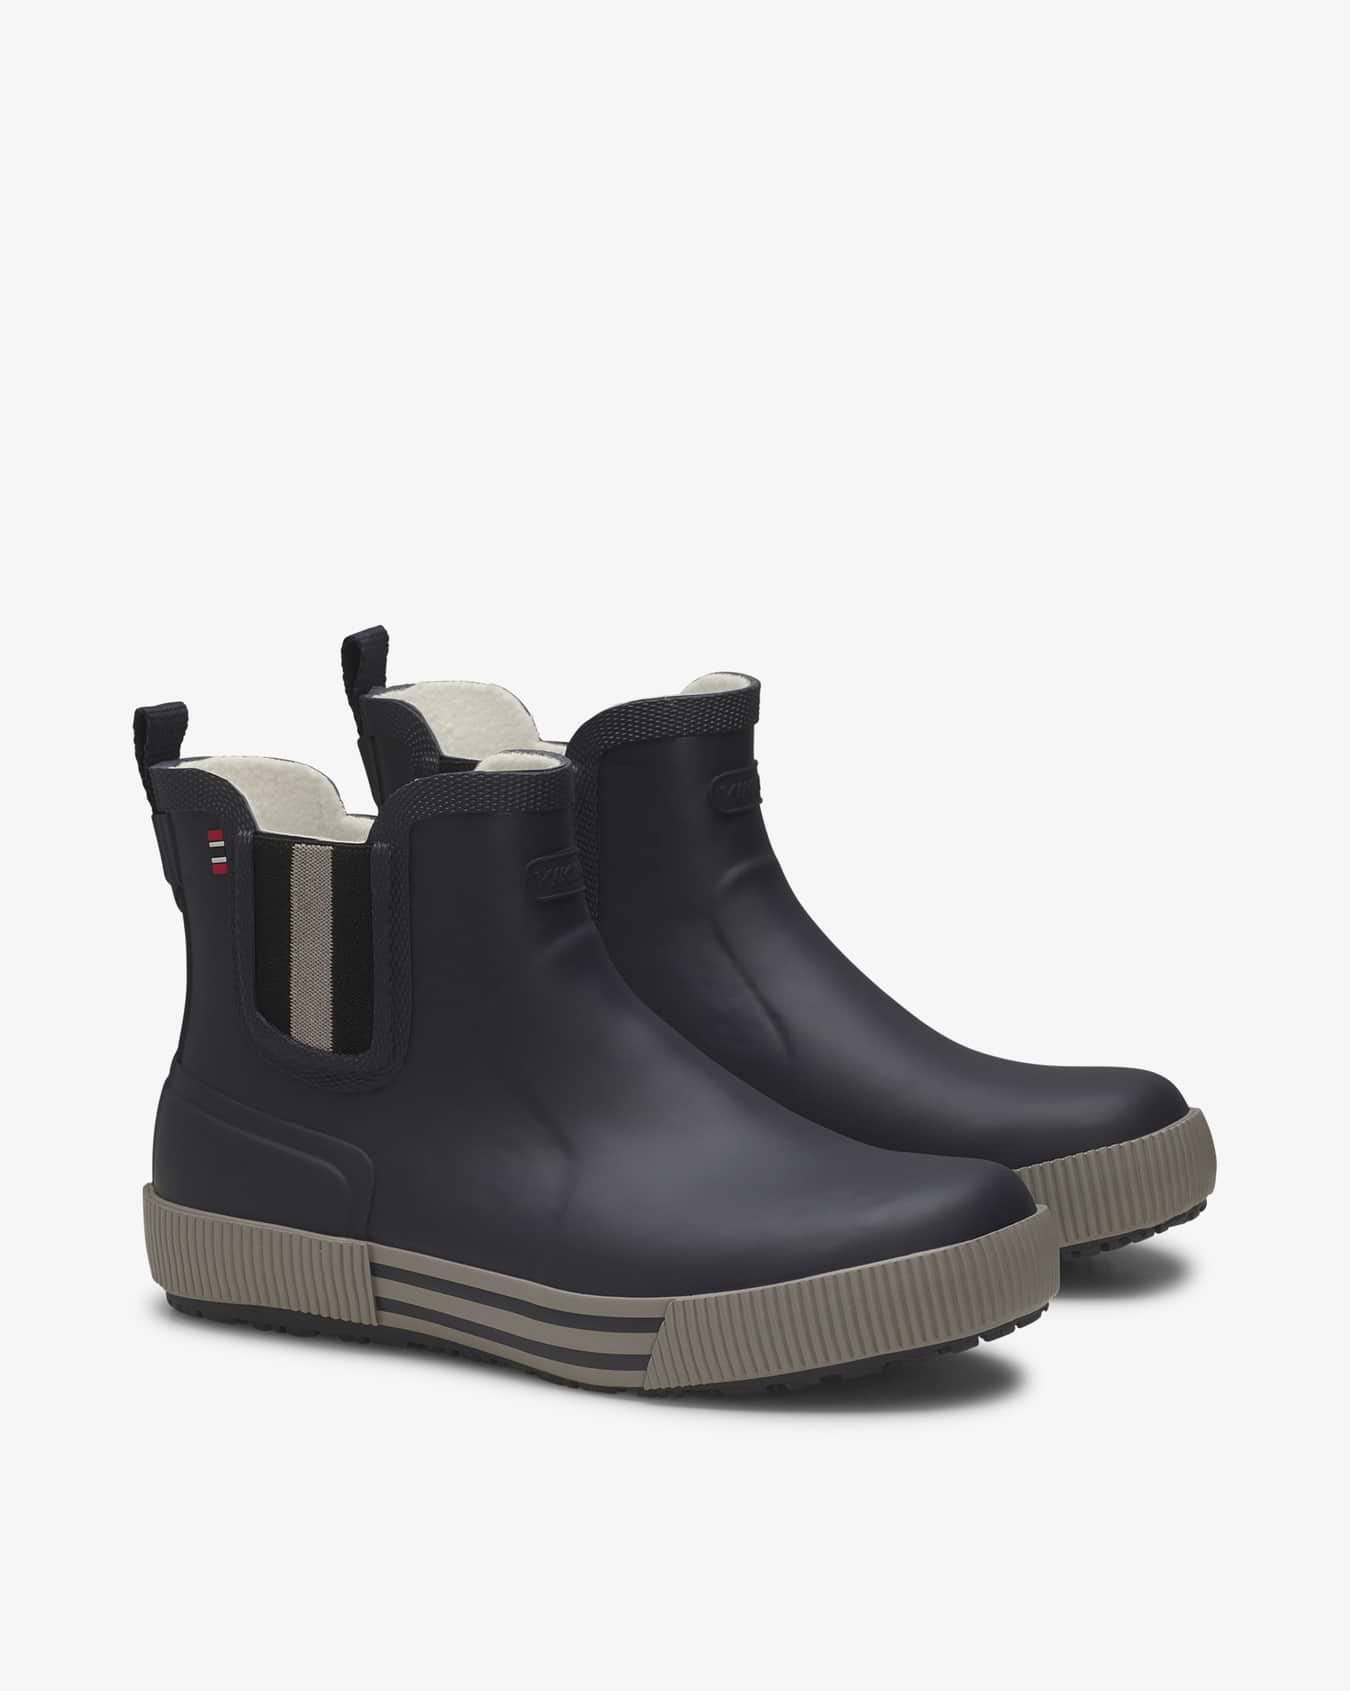 Stavern Navy/Pearlgrey Rubber Boot